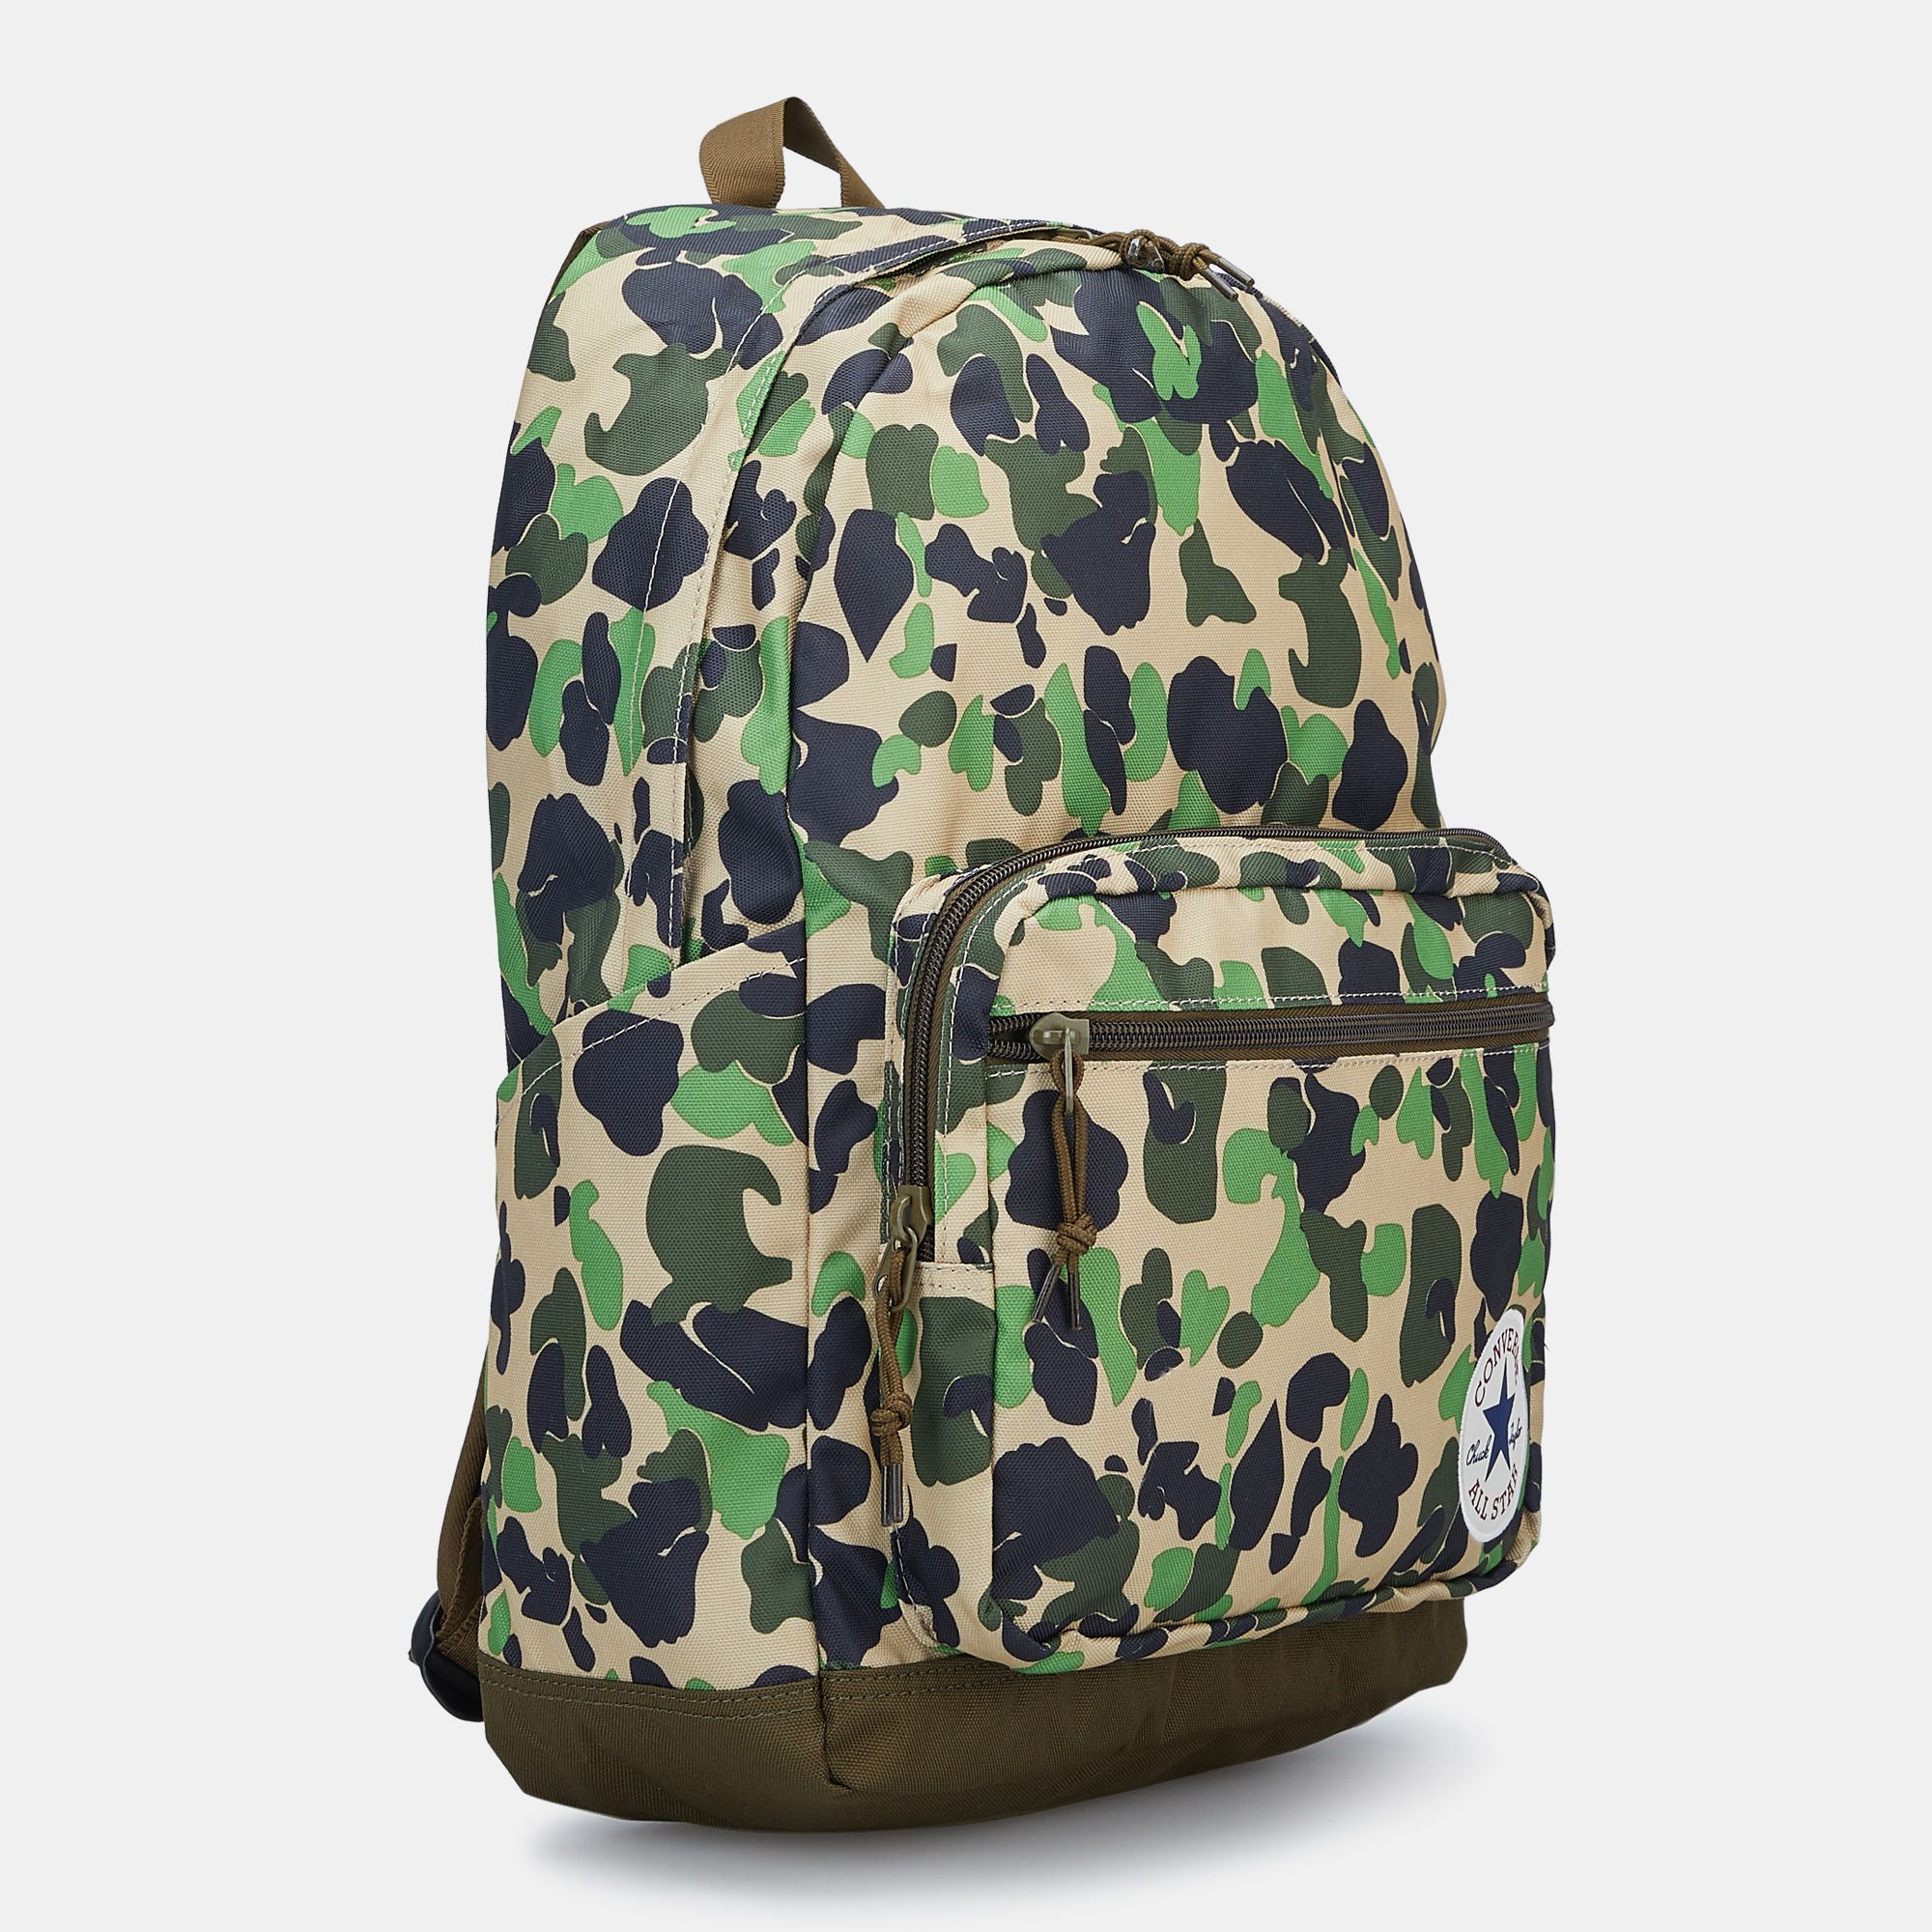 Converse Go 2 Backpack | Backpacks and Rucksacks | Bags and Luggage ...